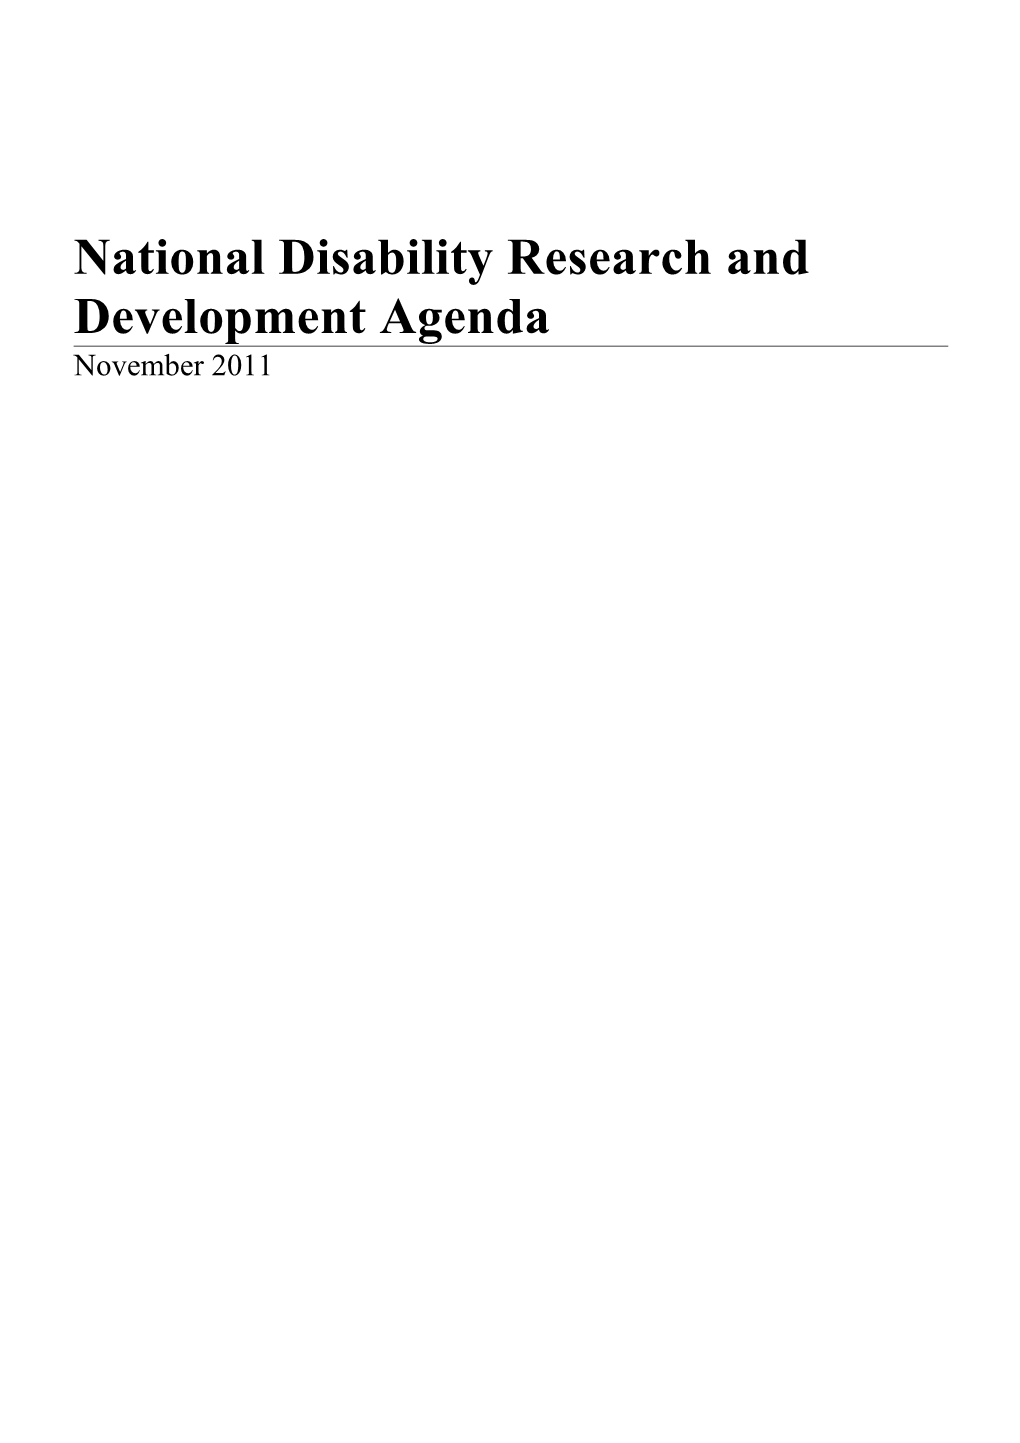 National Disability Research and Development Agenda